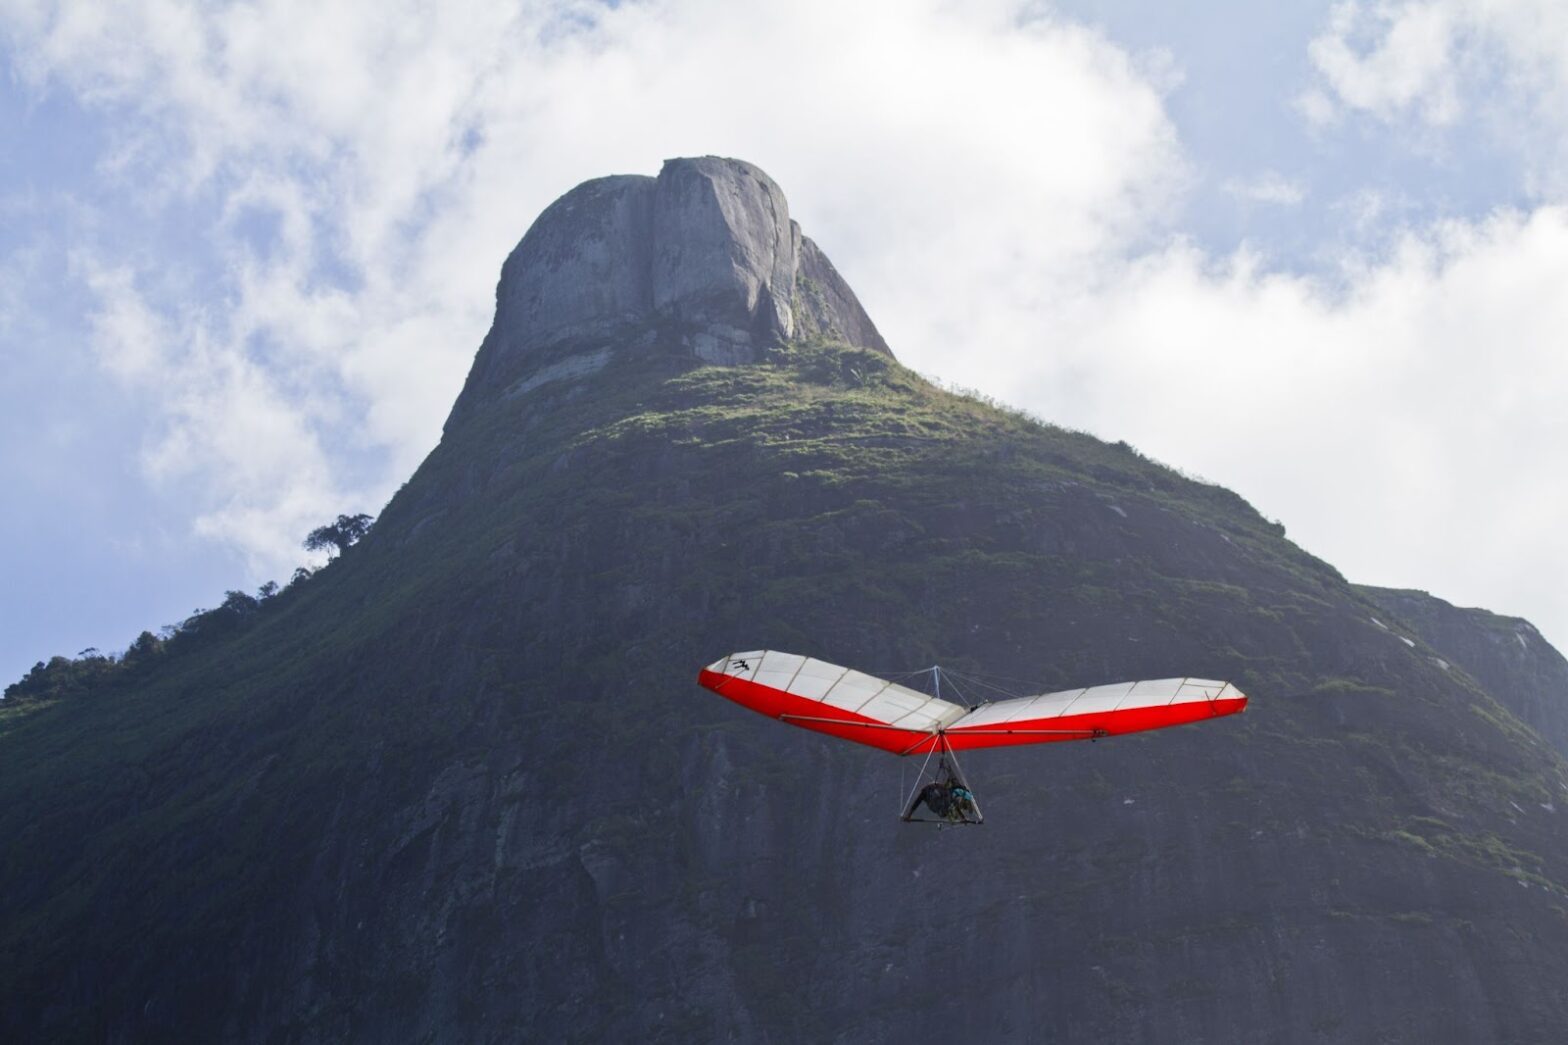 Human flying on a hang glider near a mountain